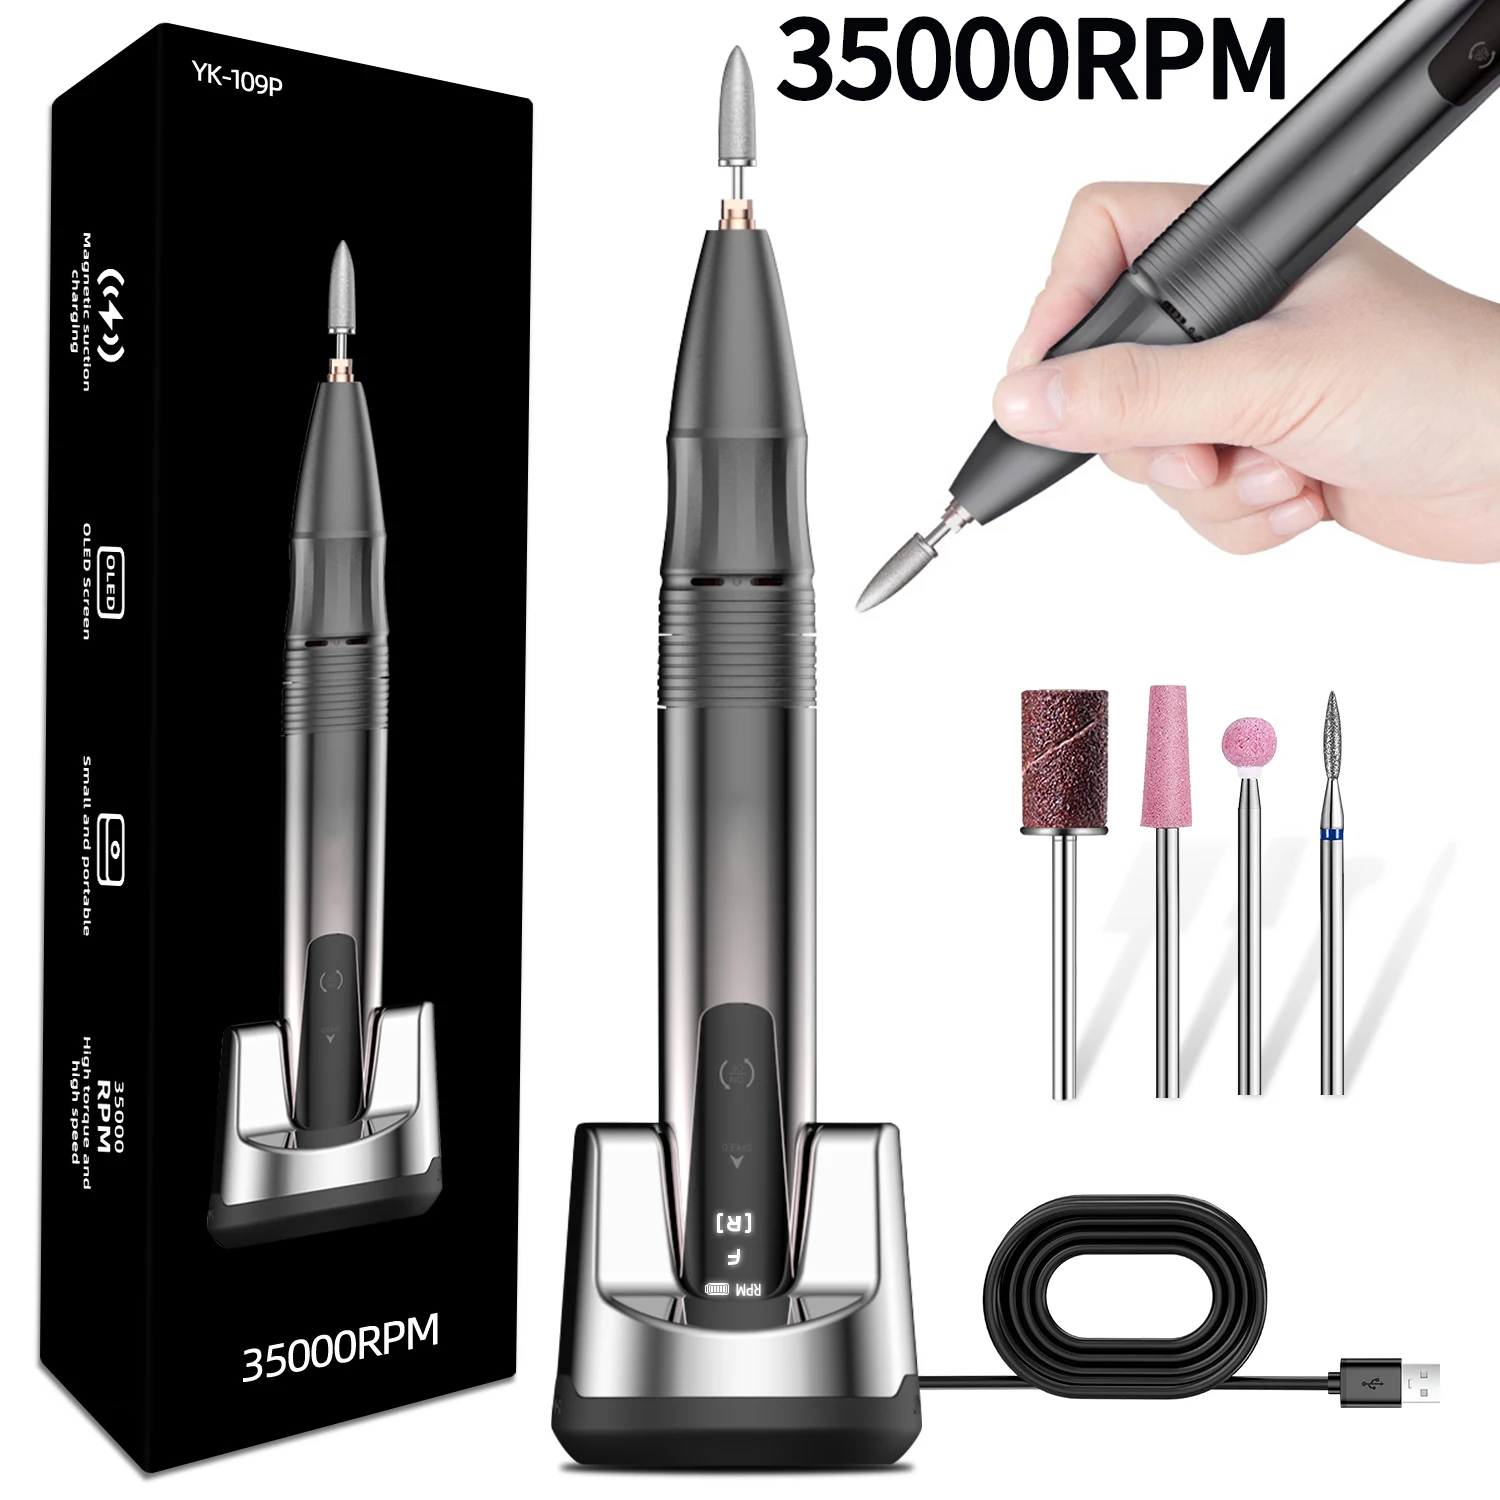 35000RPM Manicure Machine Electric Portable Cordless Nail Drill Machine With Cutter Nail Drill Device Art Tool For Nail Pedicure